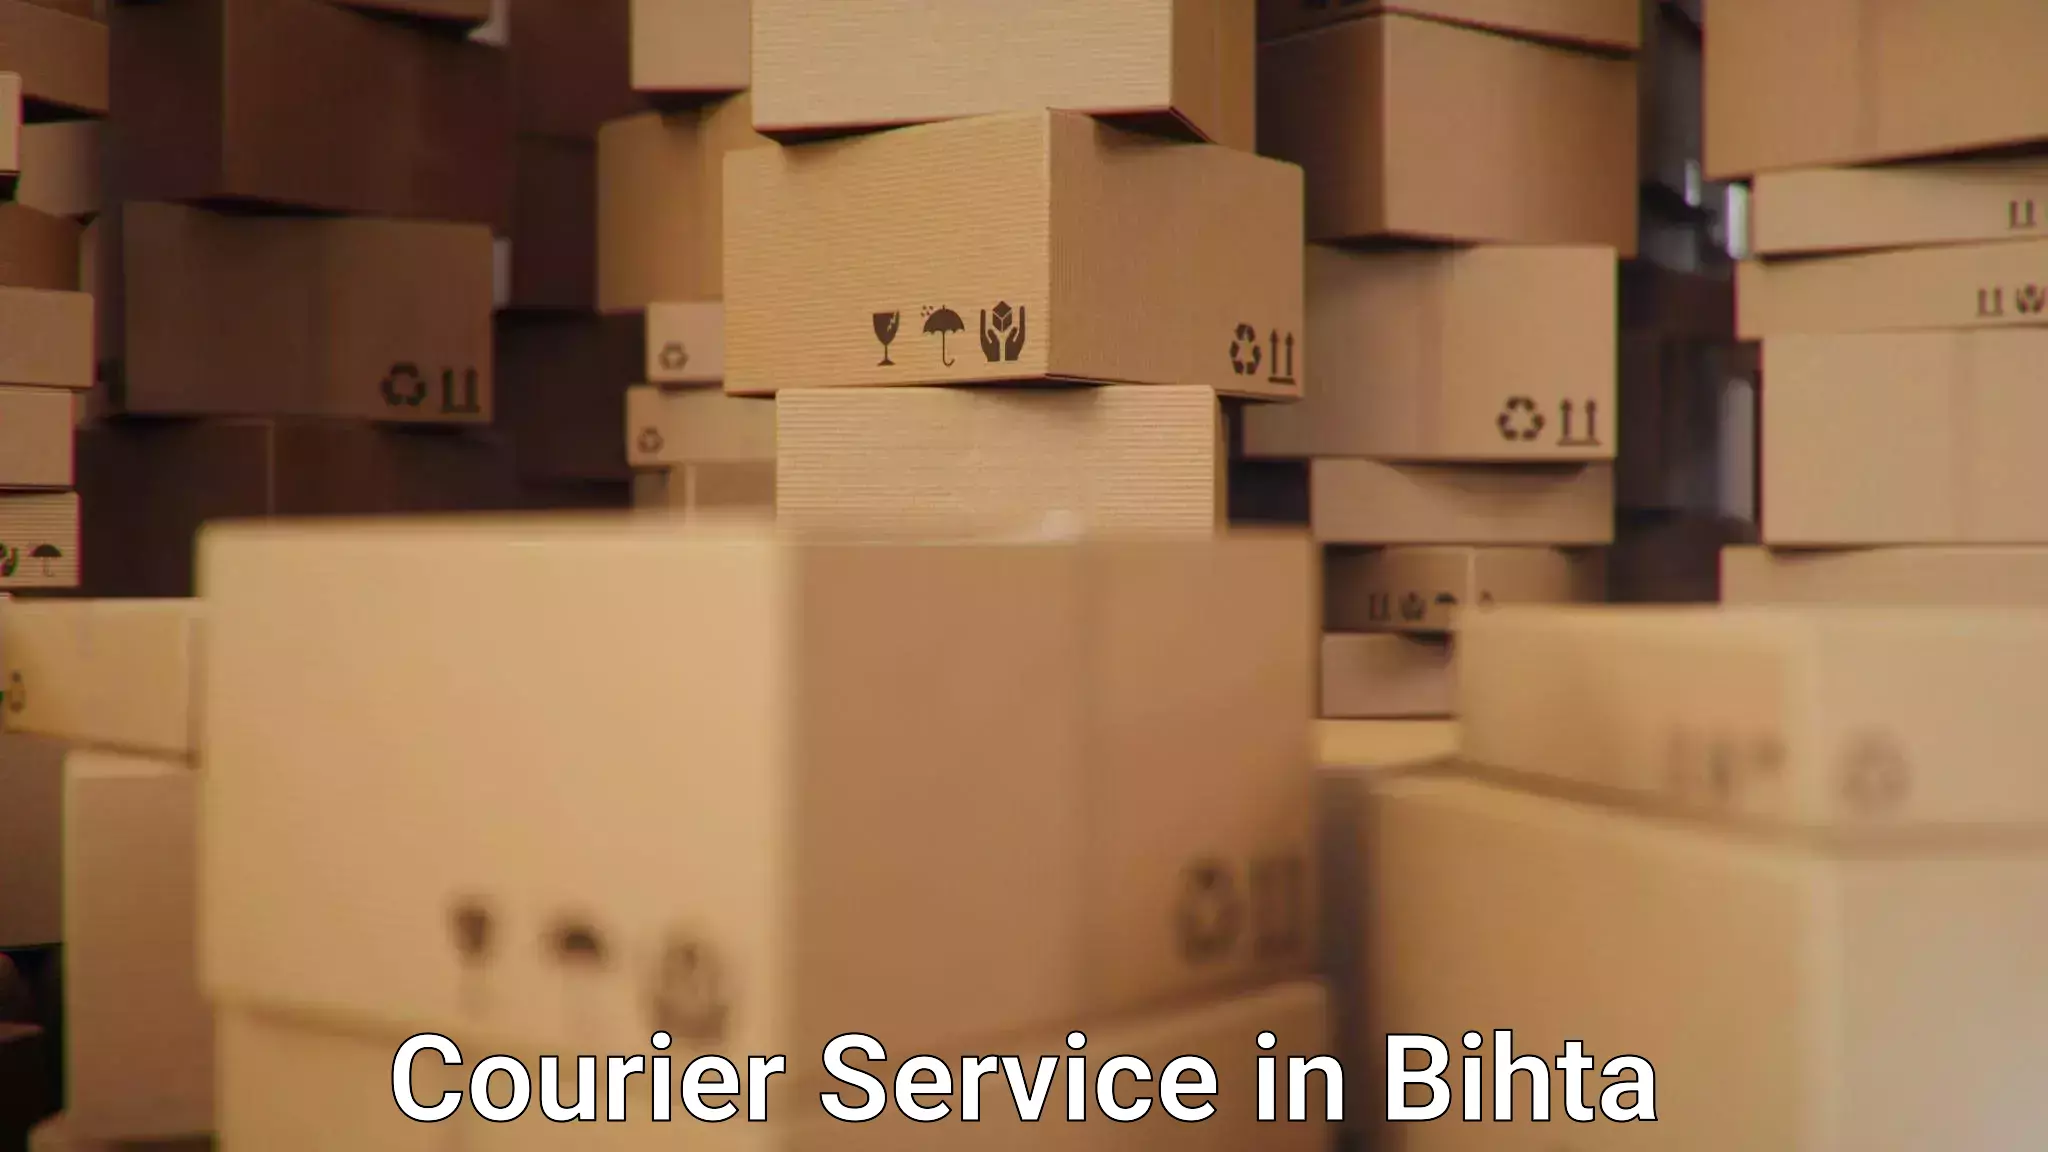 Advanced shipping services in Bihta